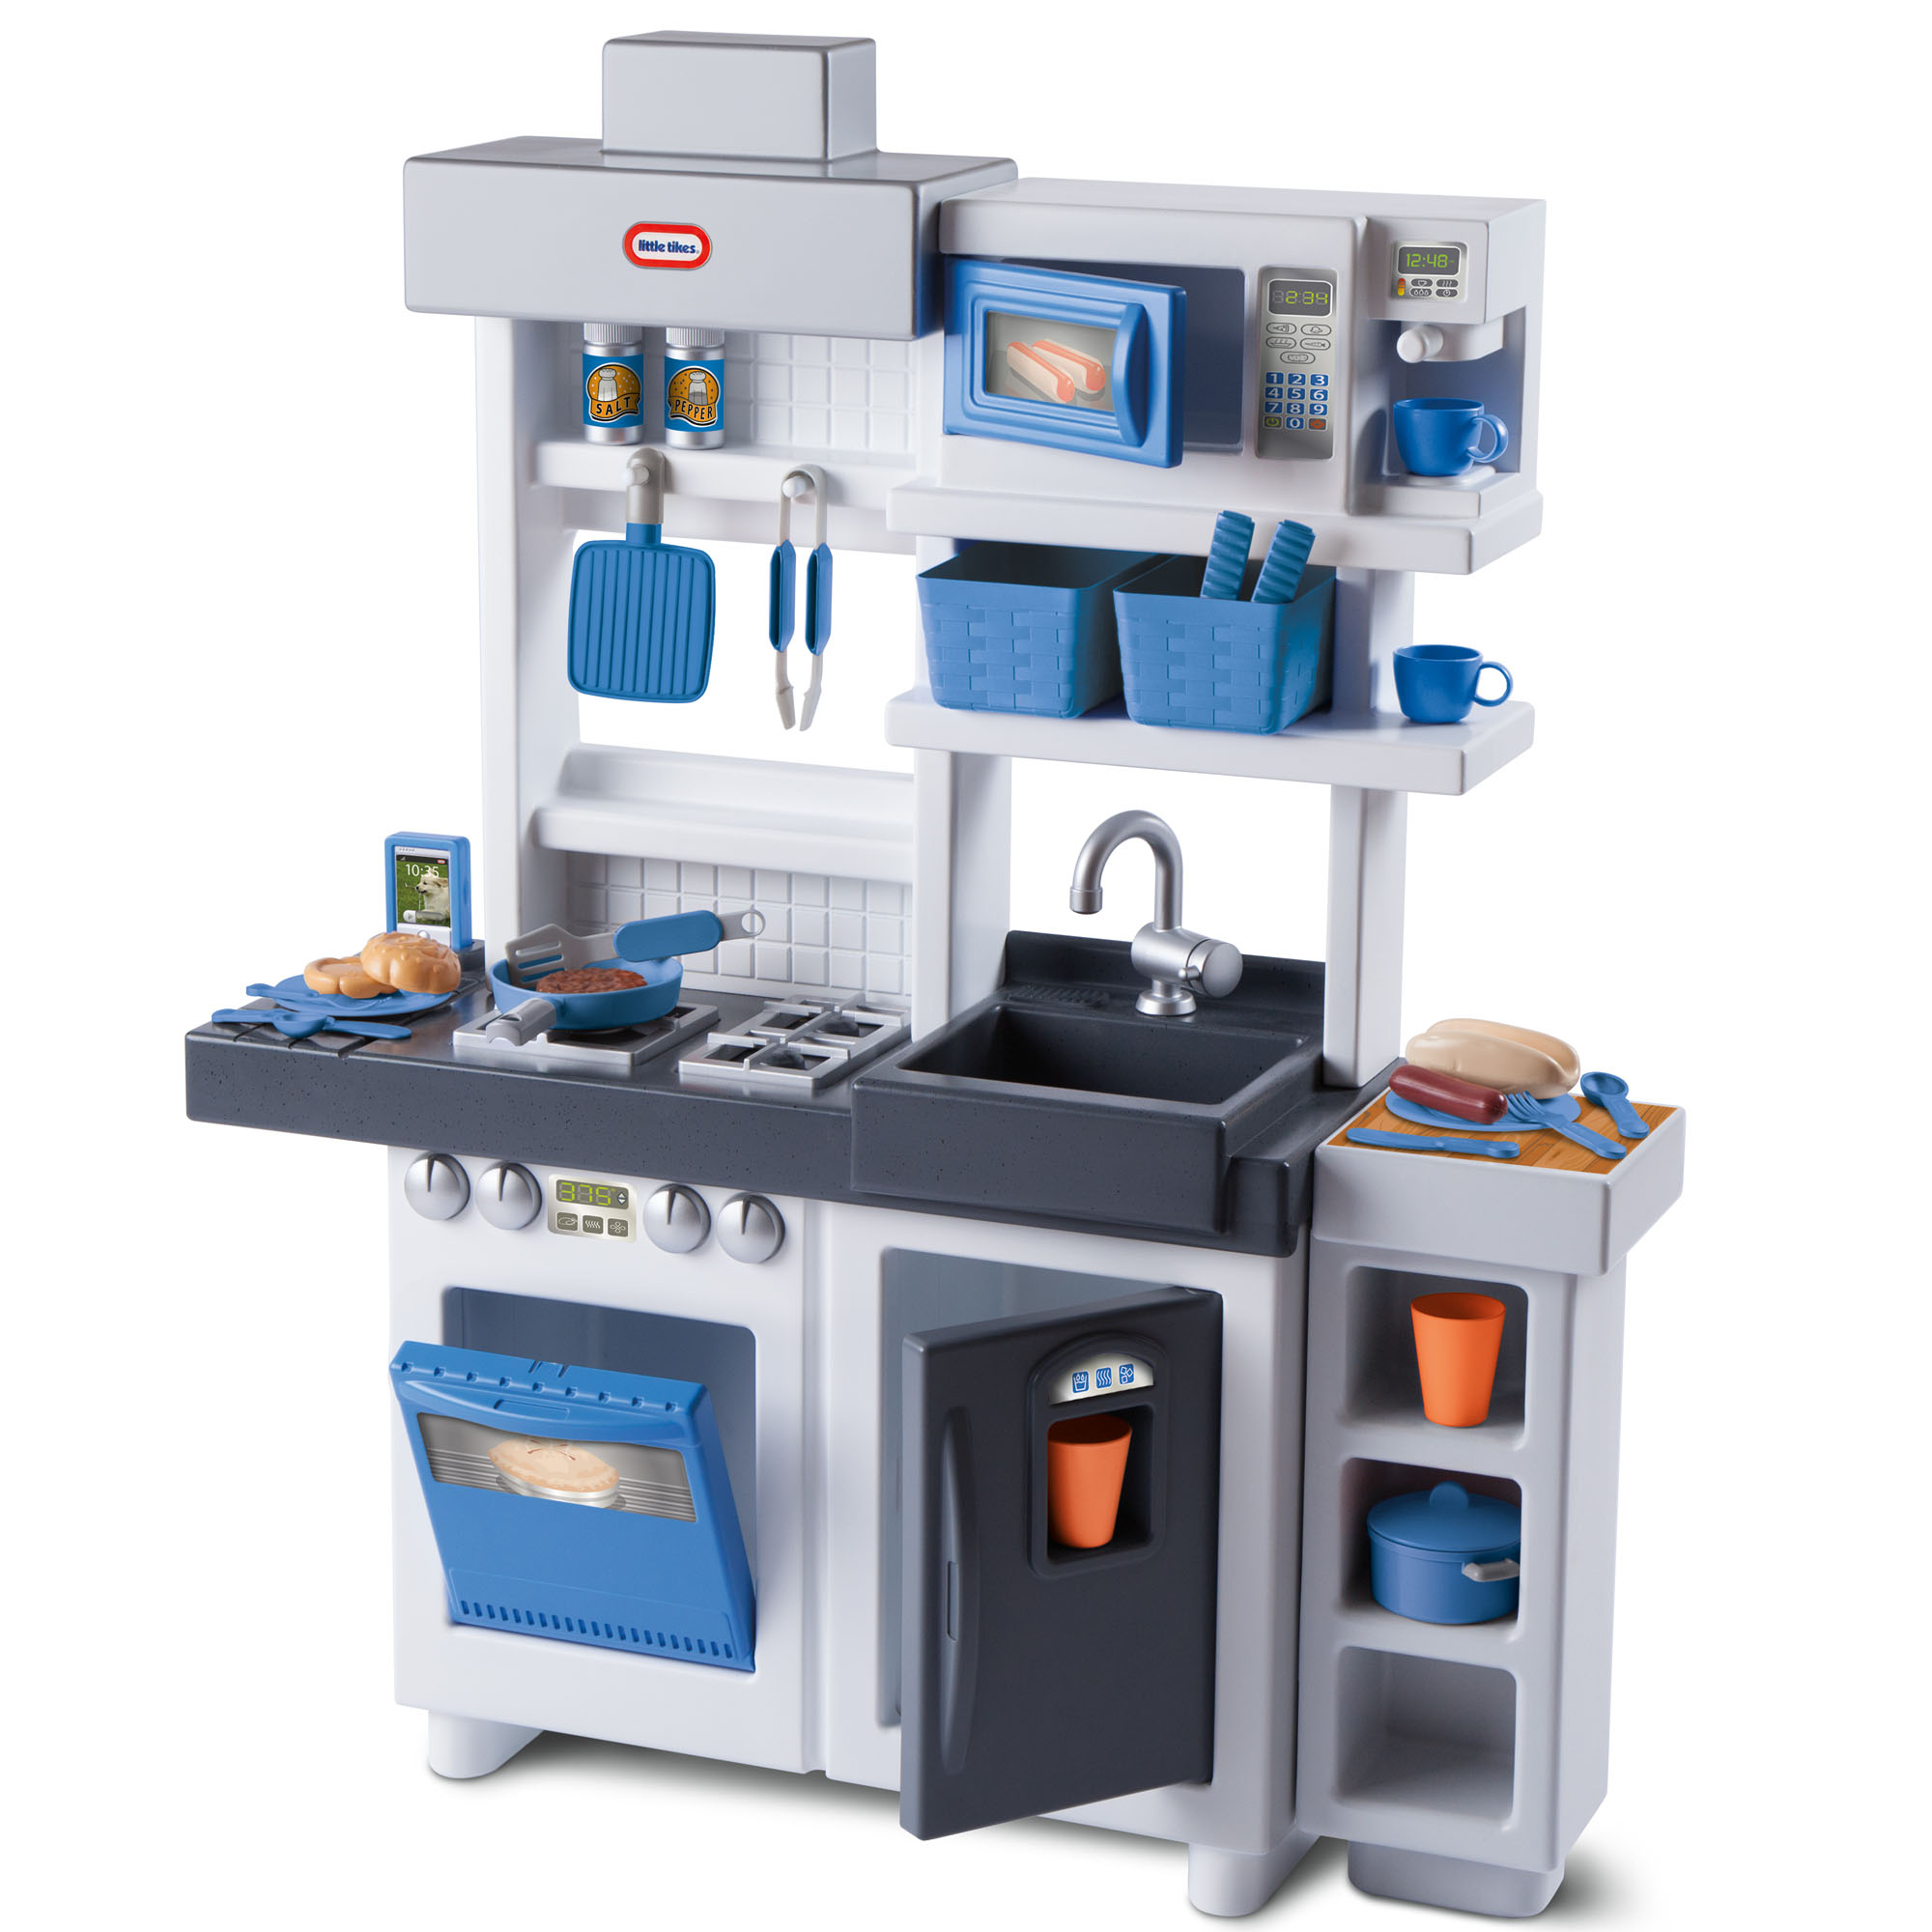 Buy Little Tikes Ultimate Cook Play Kitchen With 30 Piece Accessory Play Set Online In Taiwan 37298911